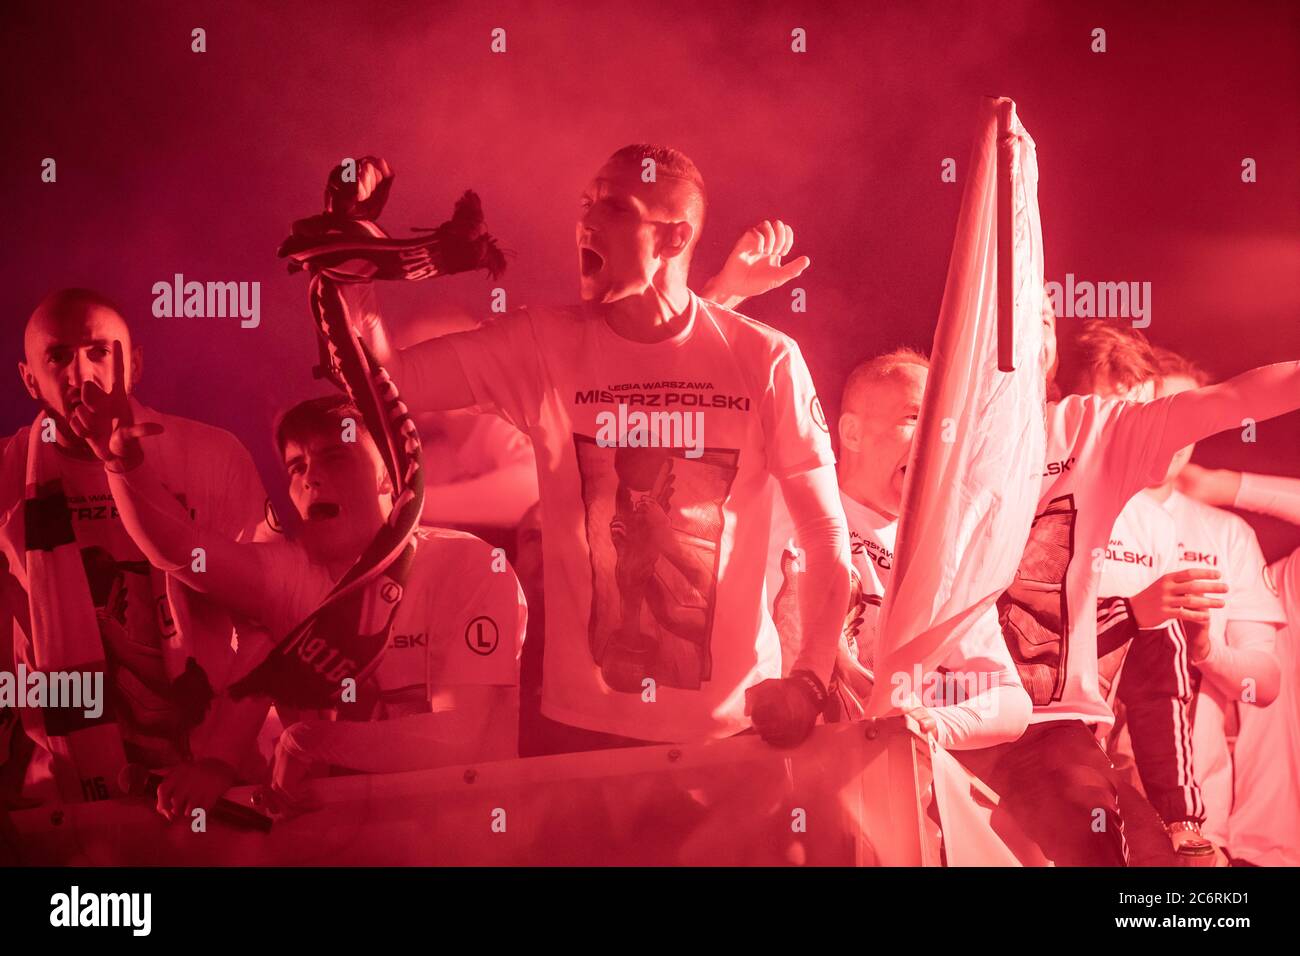 Warsaw, Poland. 11th July, 2020. Artur Jedrzejczyk (C) of Football Team Legia Warsaw seen celebrating after winning the 14th Polish Championship (Polish Ekstraklasa League) title in history. Credit: SOPA Images Limited/Alamy Live News Stock Photo